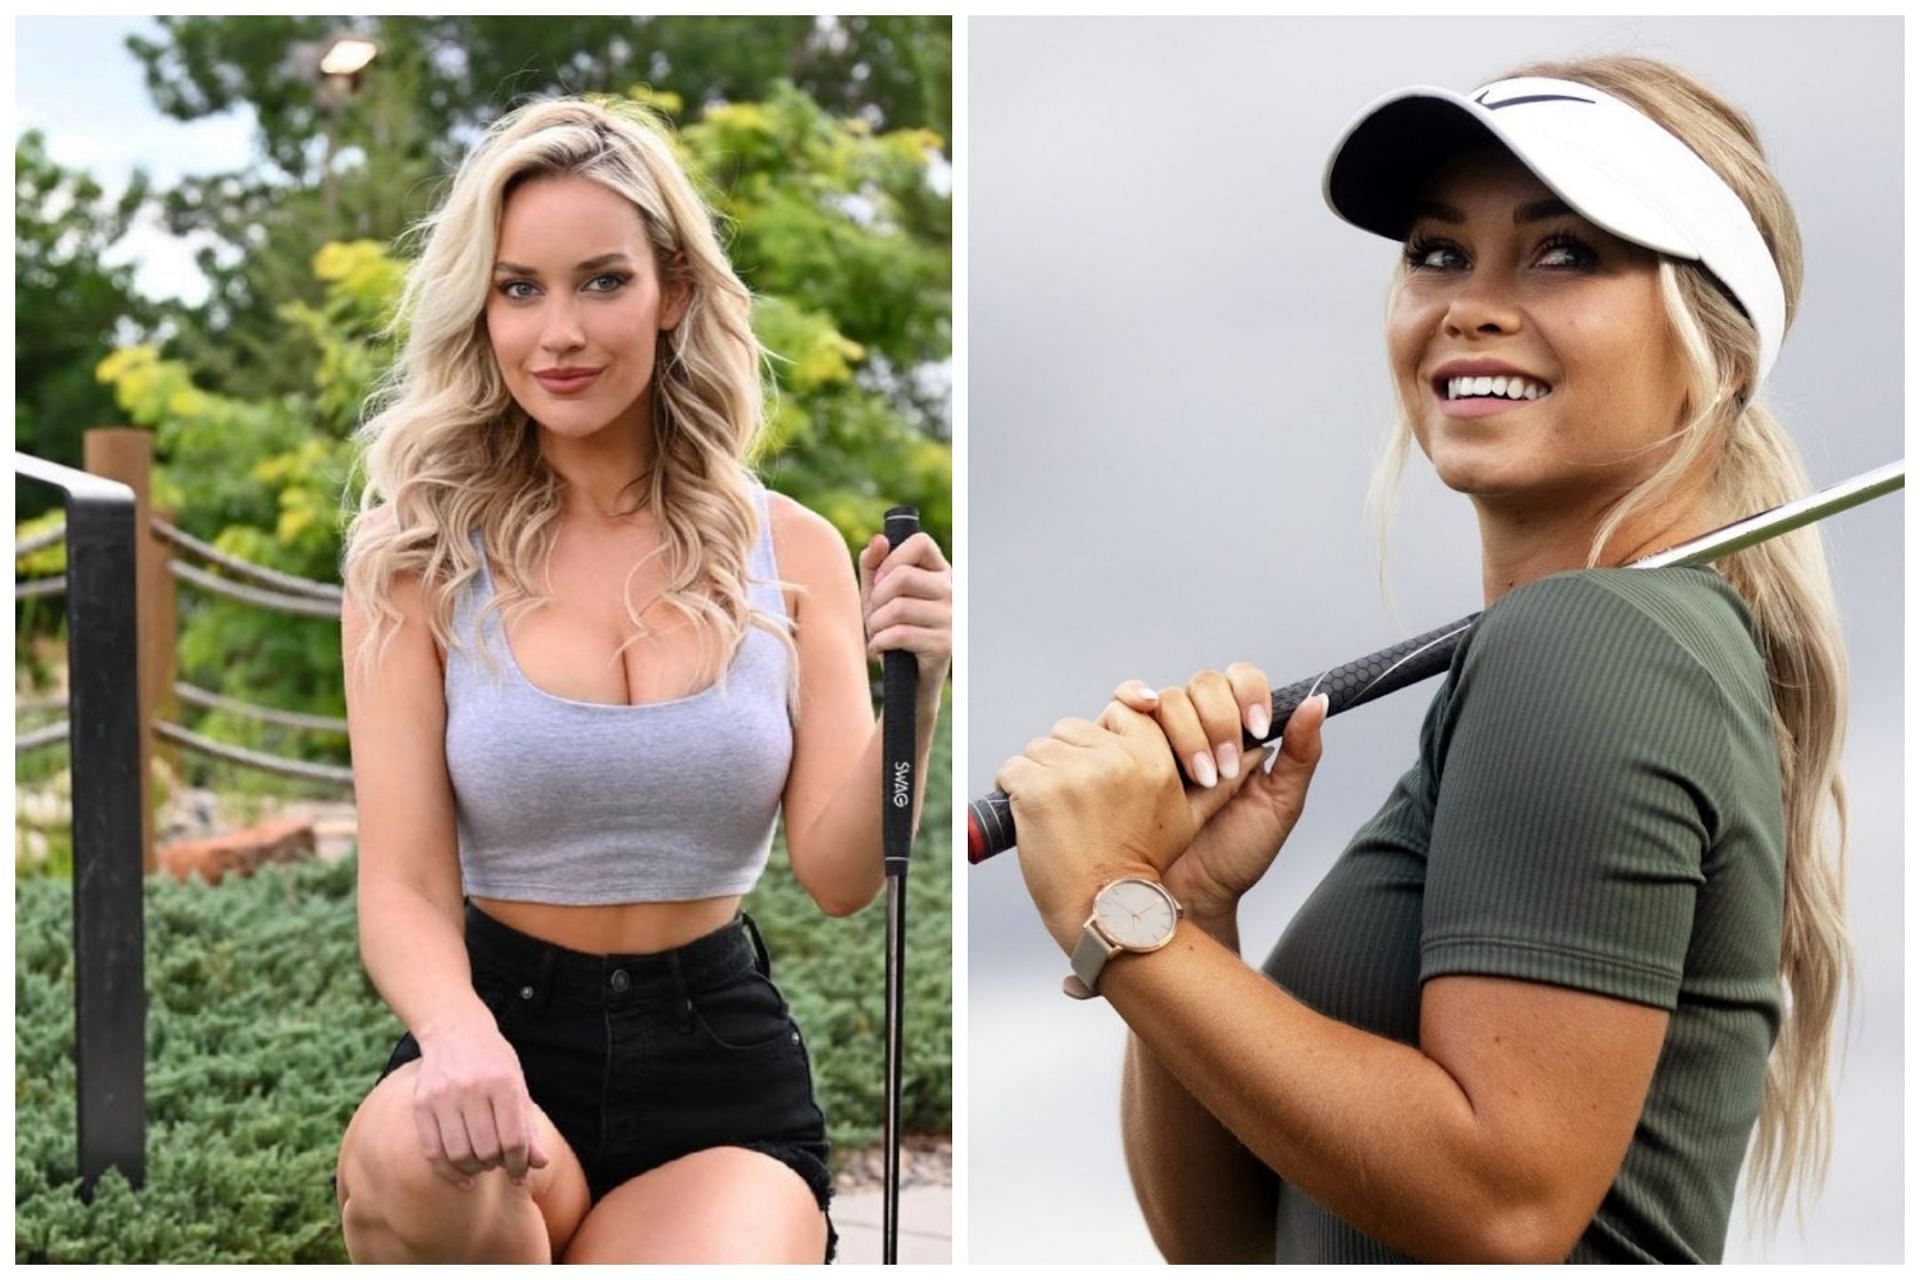 Paige Spiranac and Hailey Ostrom had an online feud last year